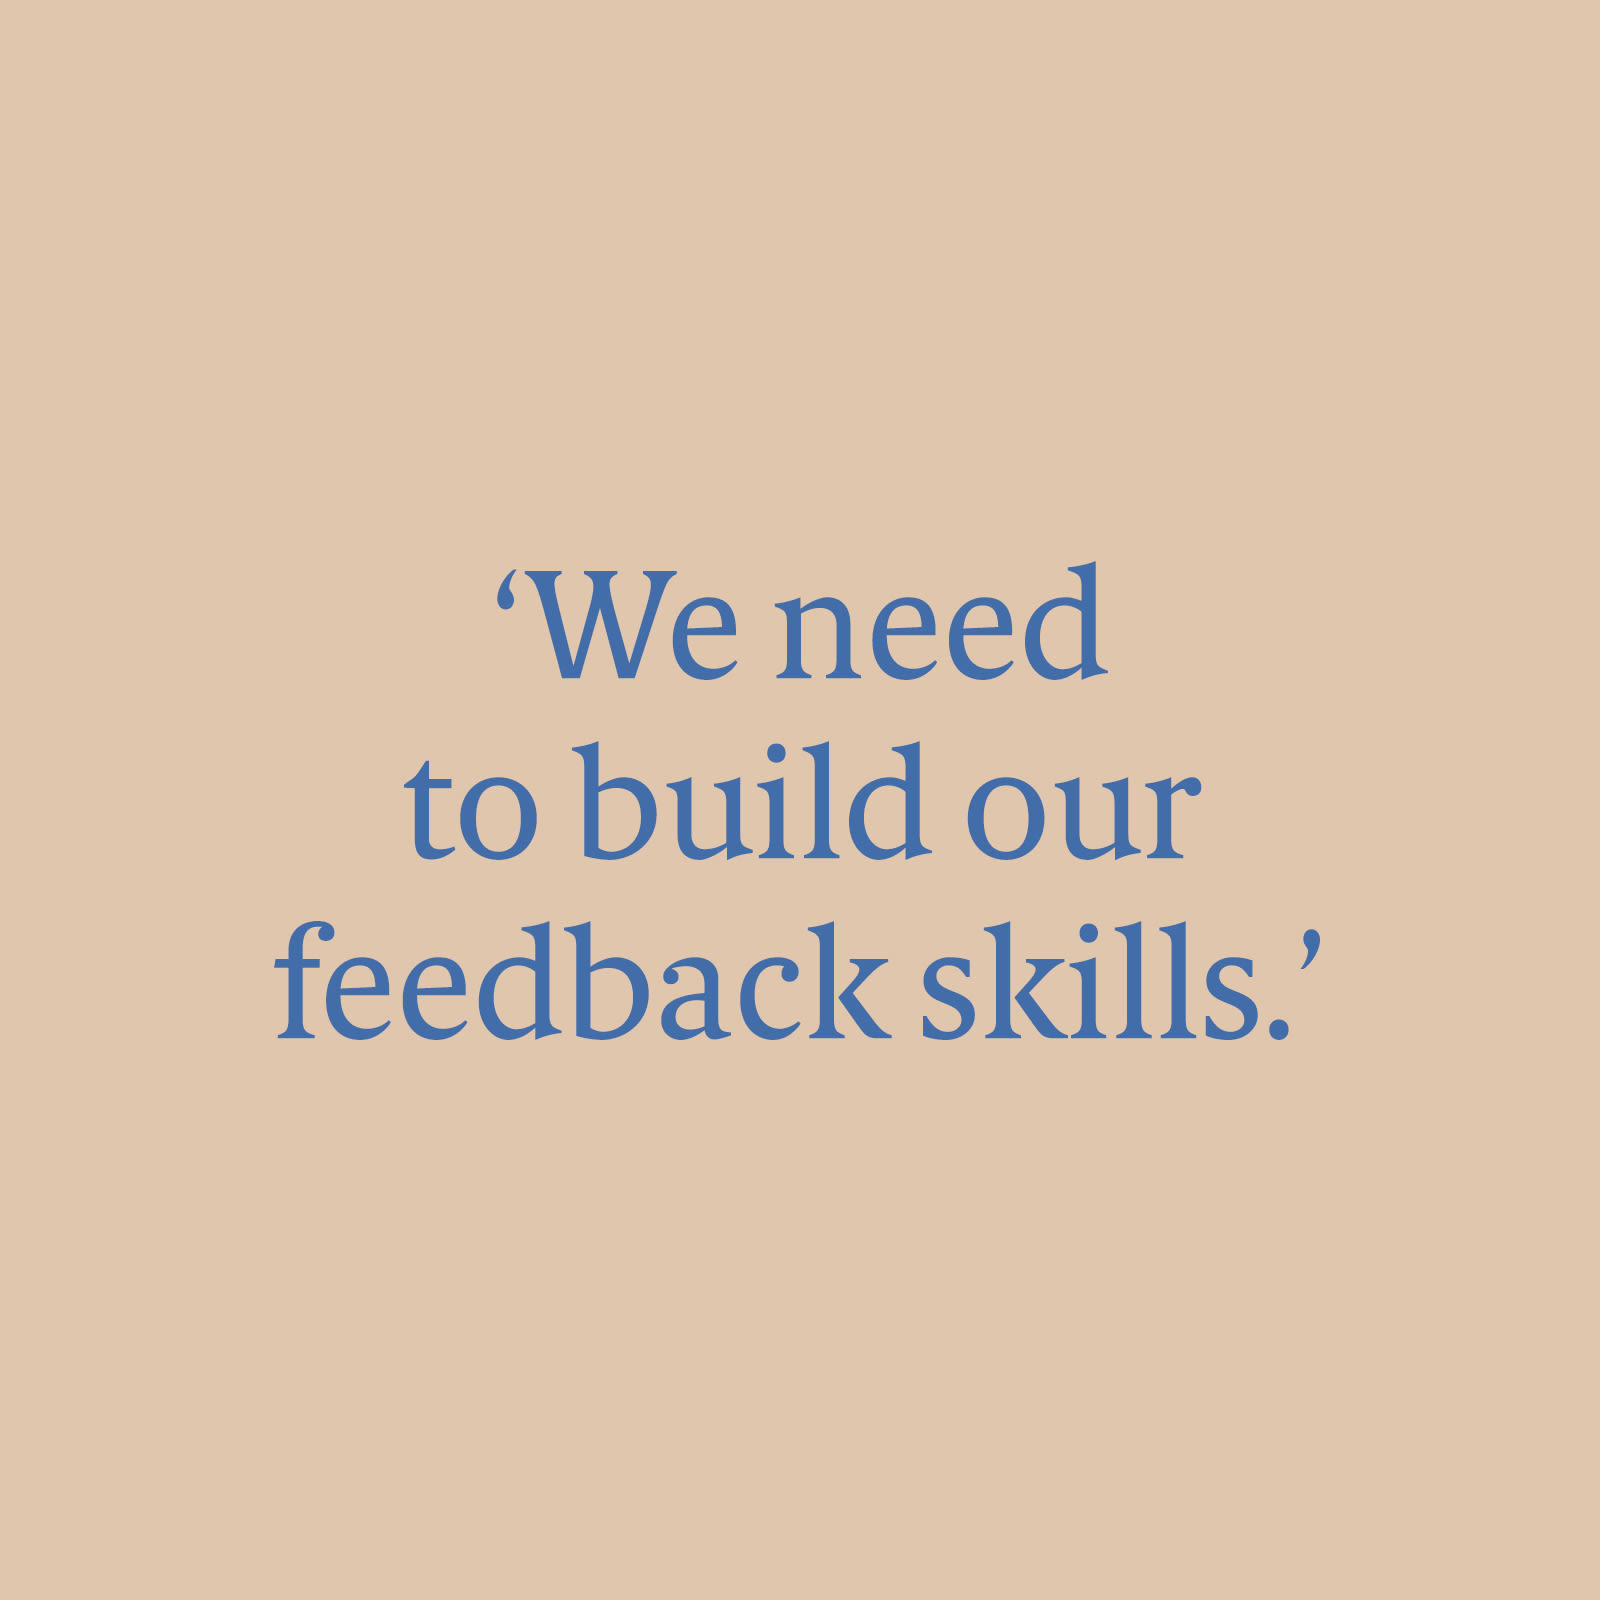 Comment: Feedback isn't just hard to receive